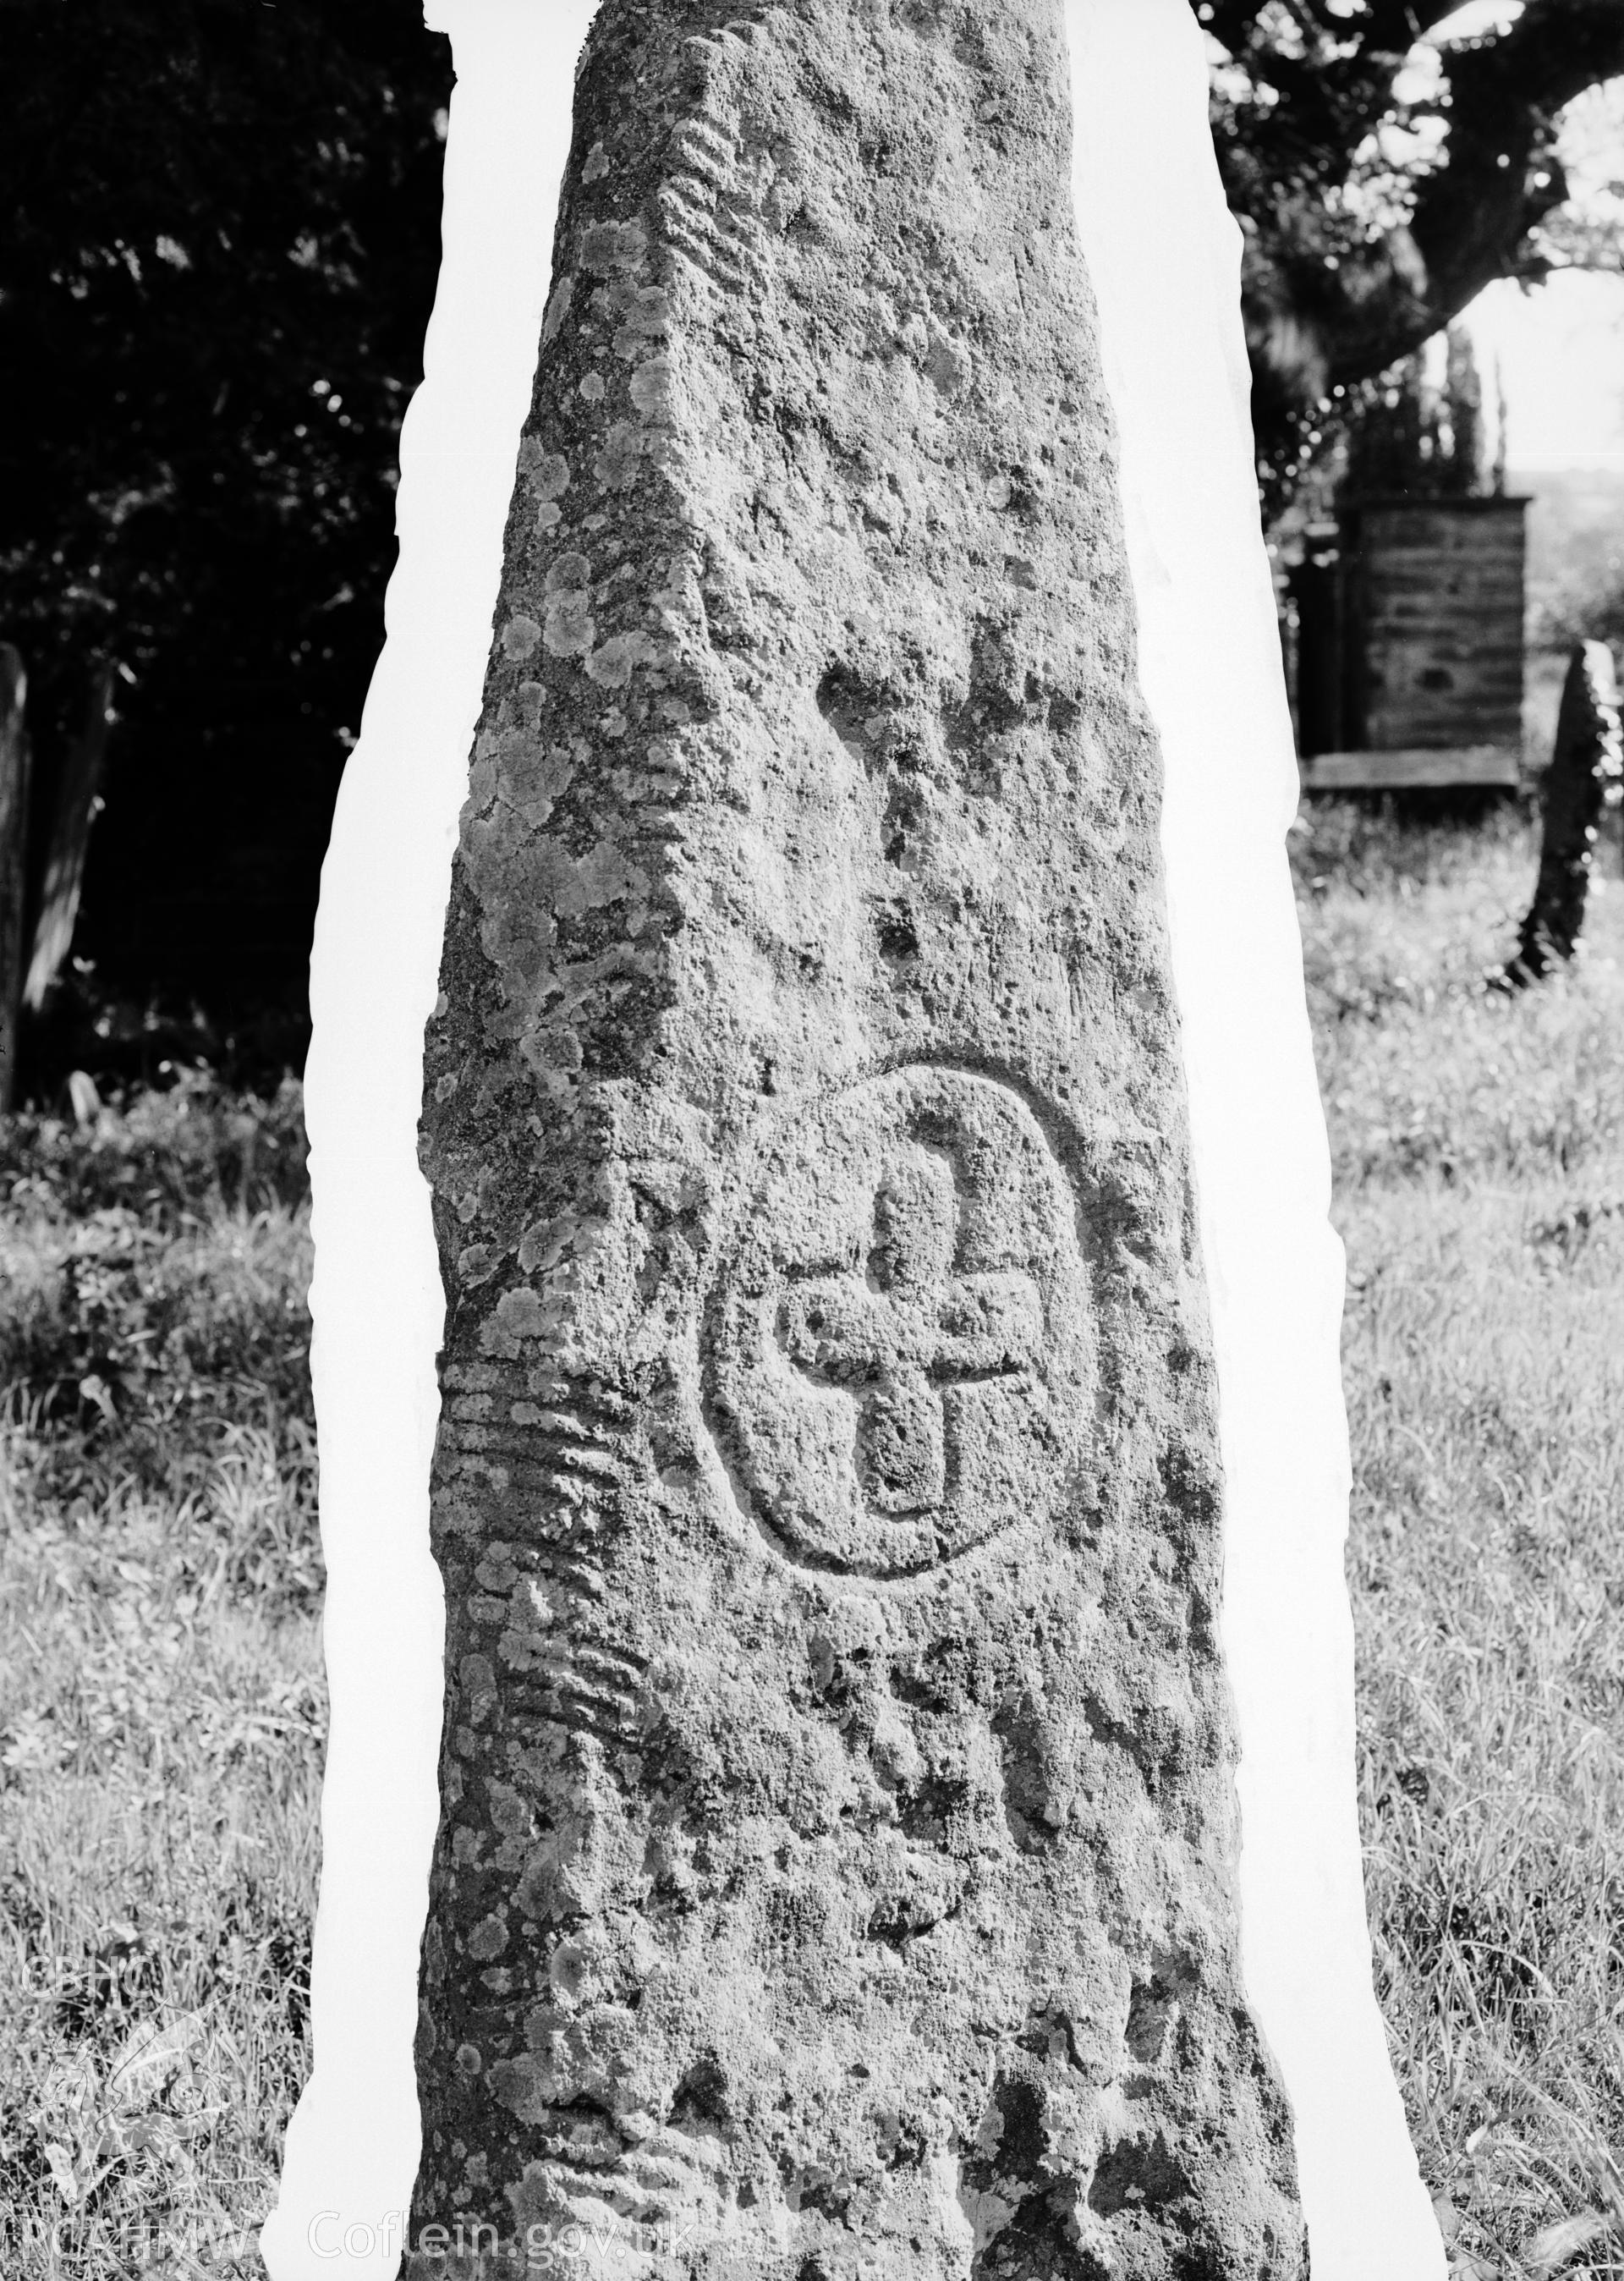 View of the Nettasagrus Stone at Bridell, taken by B.C. Clayton, c.1929.